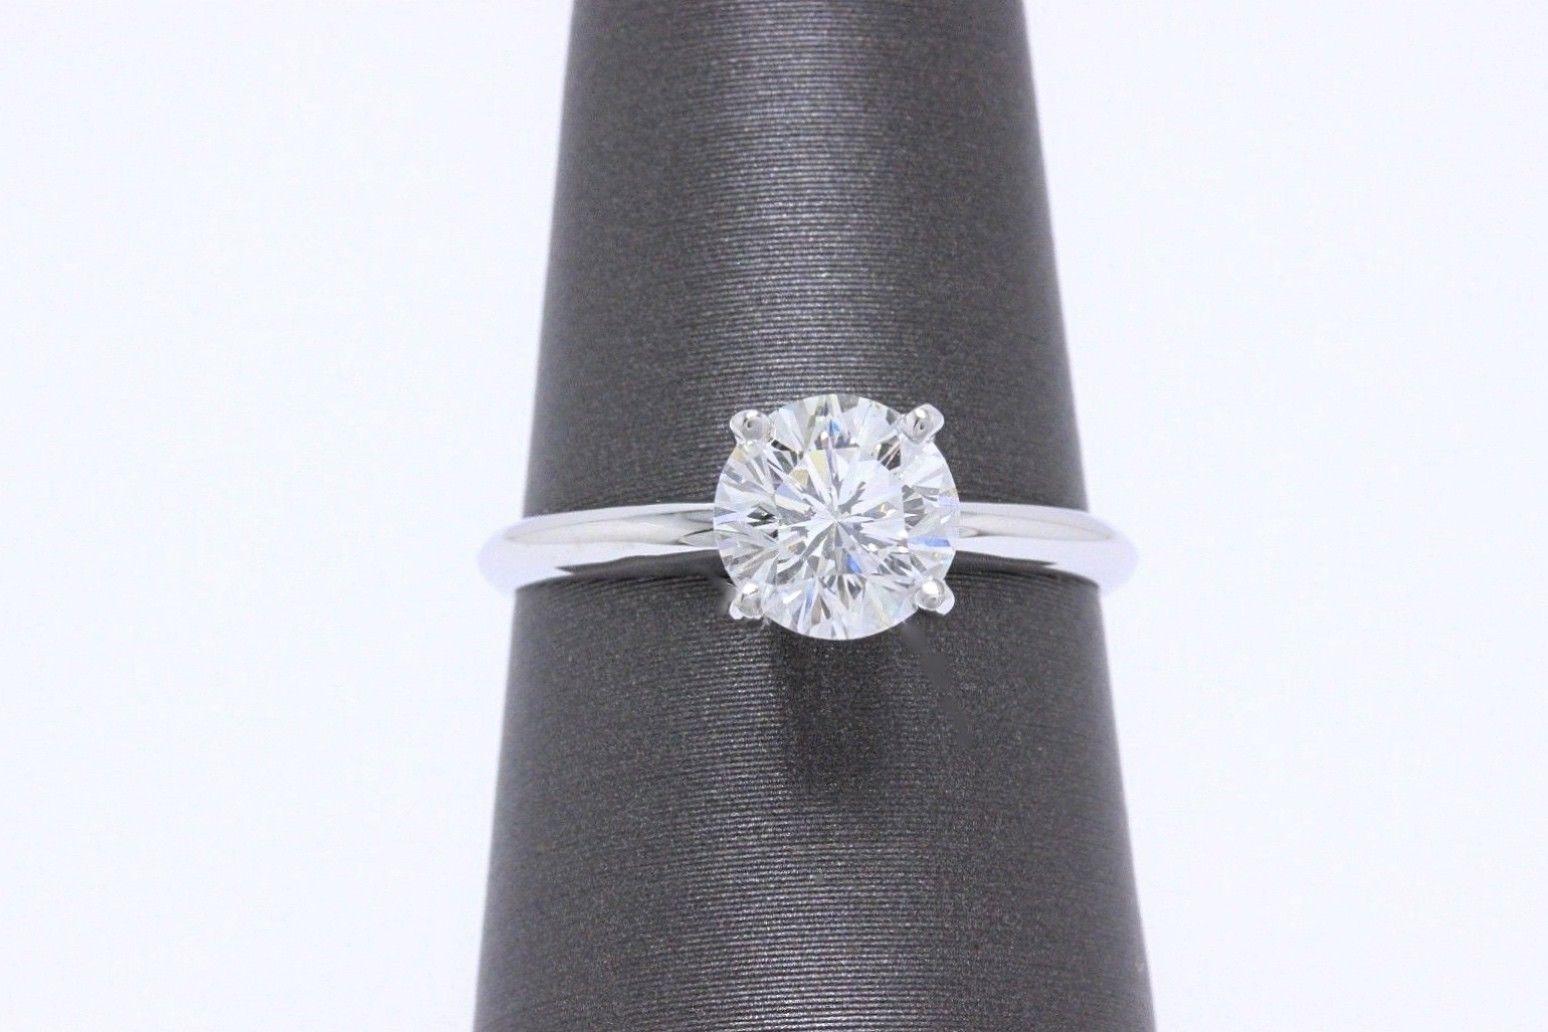  Leo Diamond Round Brilliant Solitaire Engagement Ring 1.00 CTS H SI1 14K W G In Excellent Condition For Sale In San Diego, CA